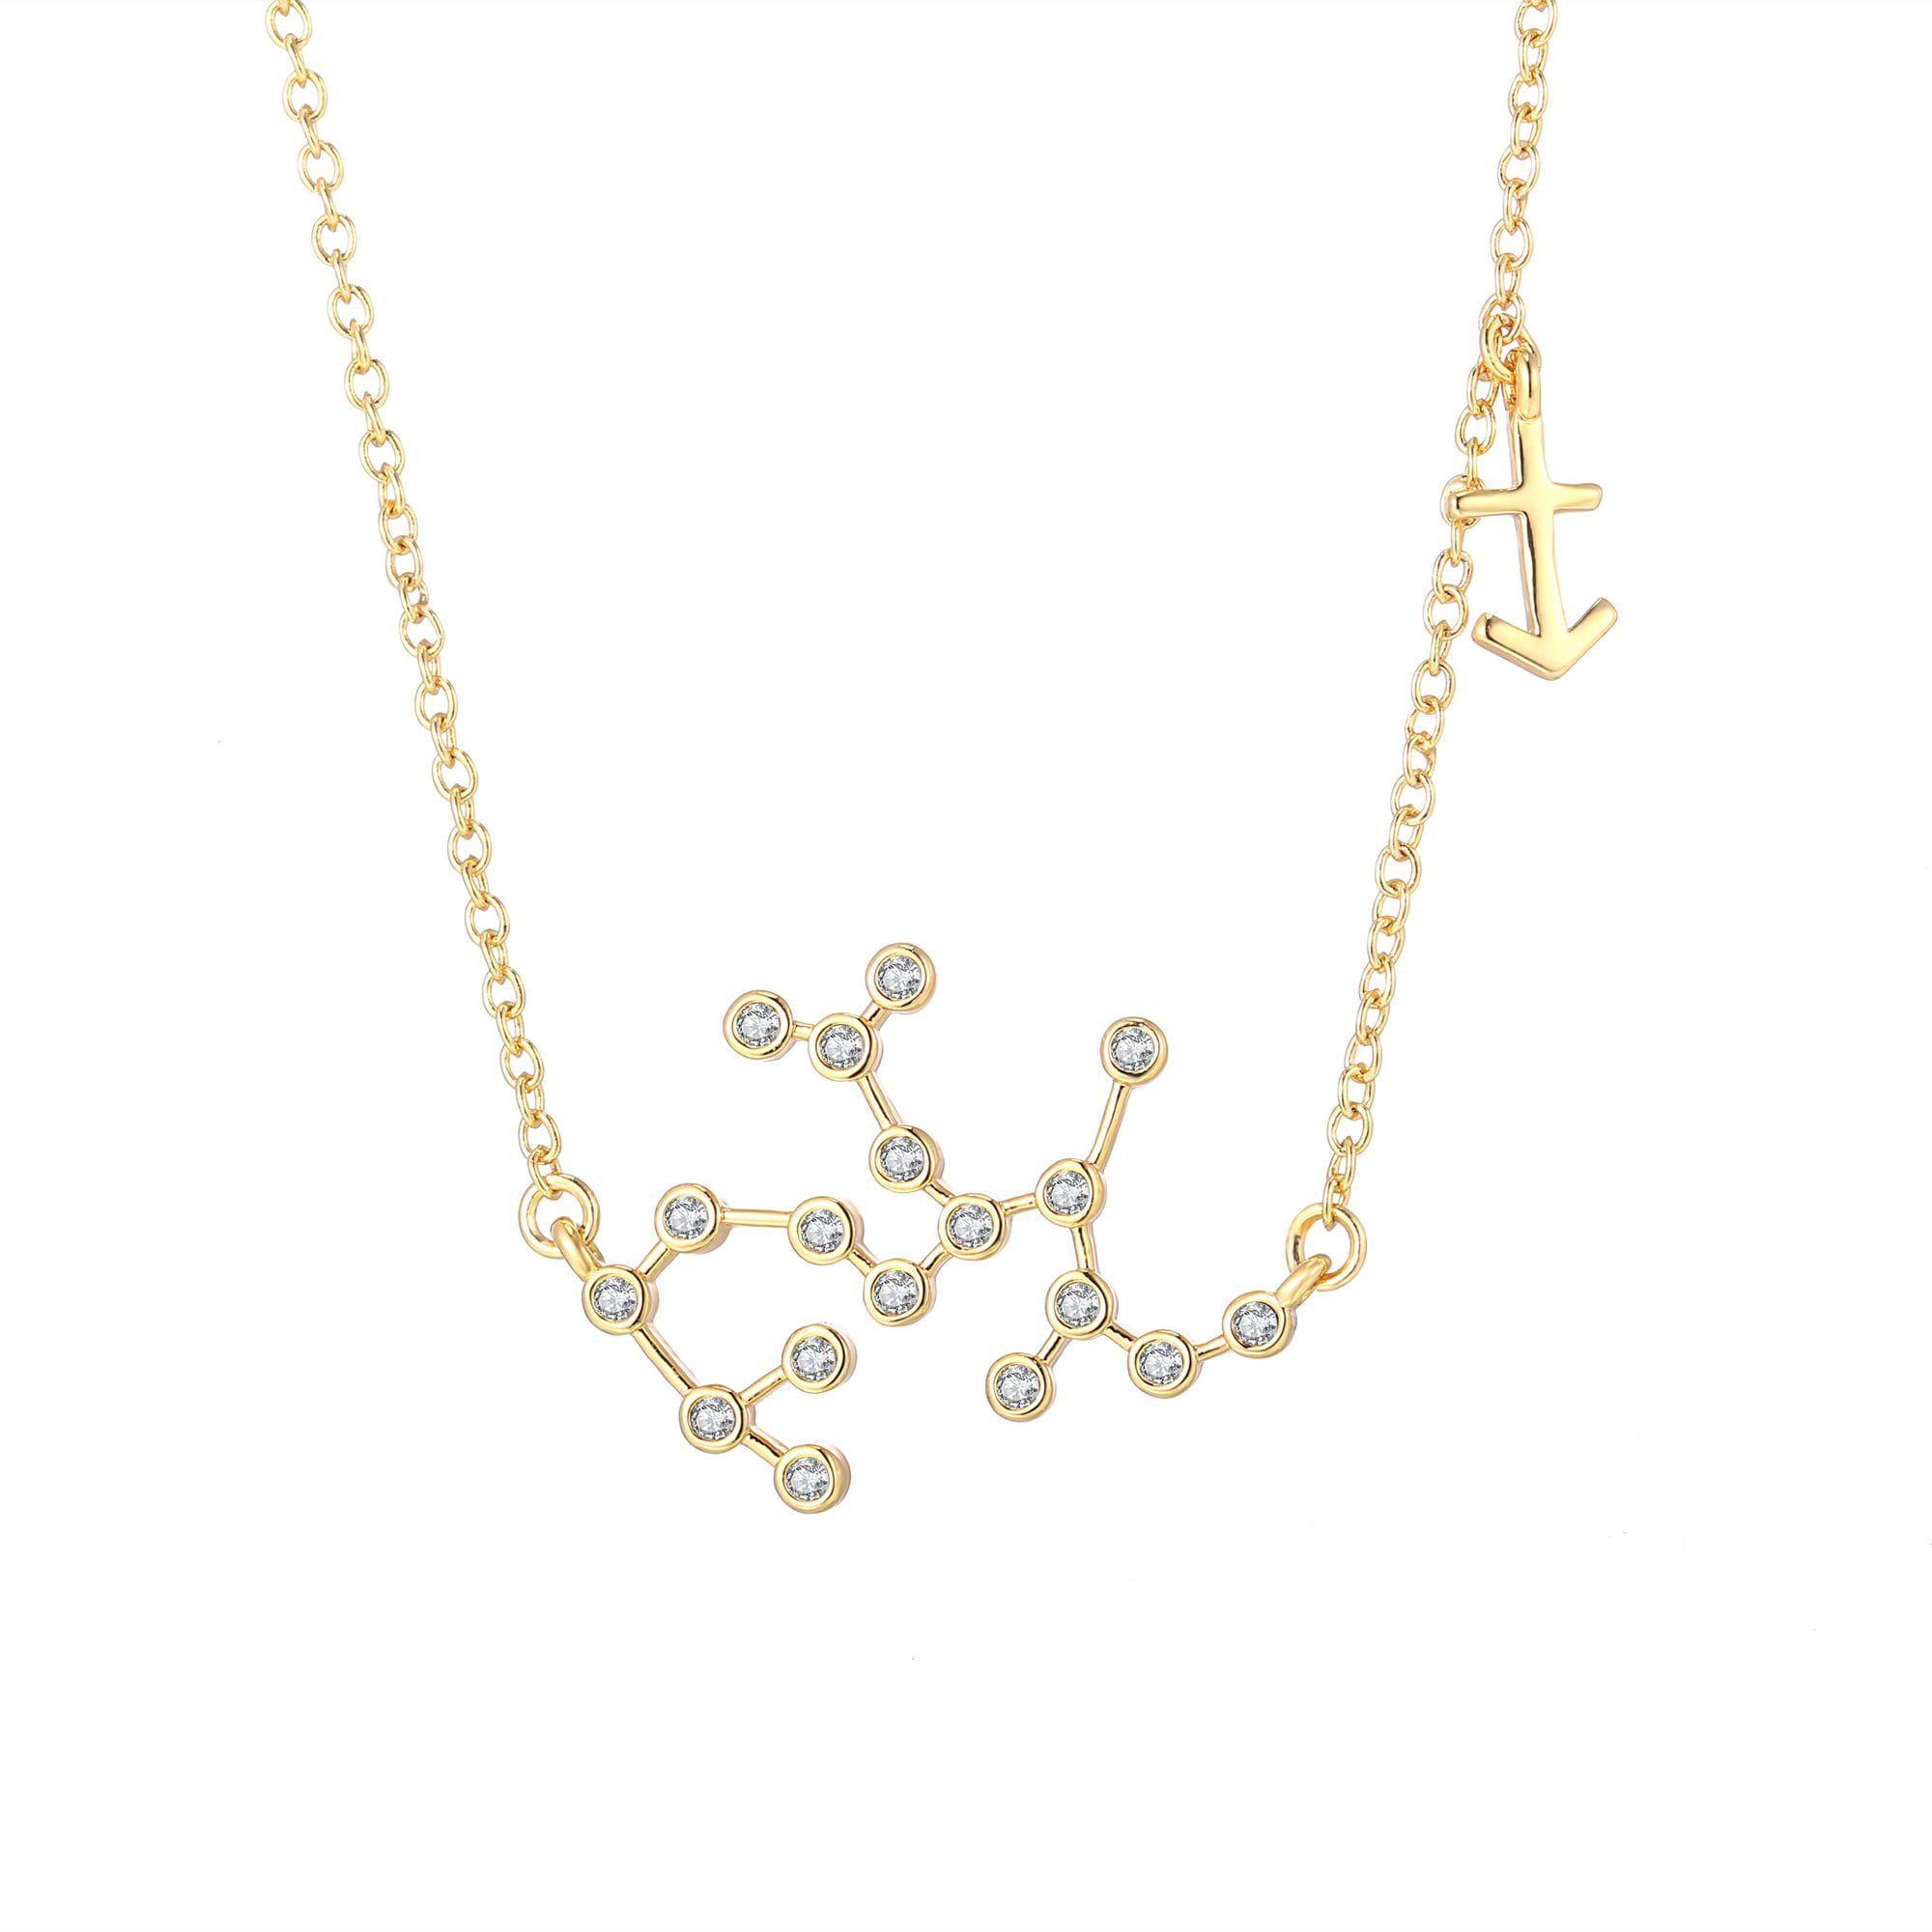 Peermont 18k Gold Plated Zodiac Constellation Necklace, Astrology